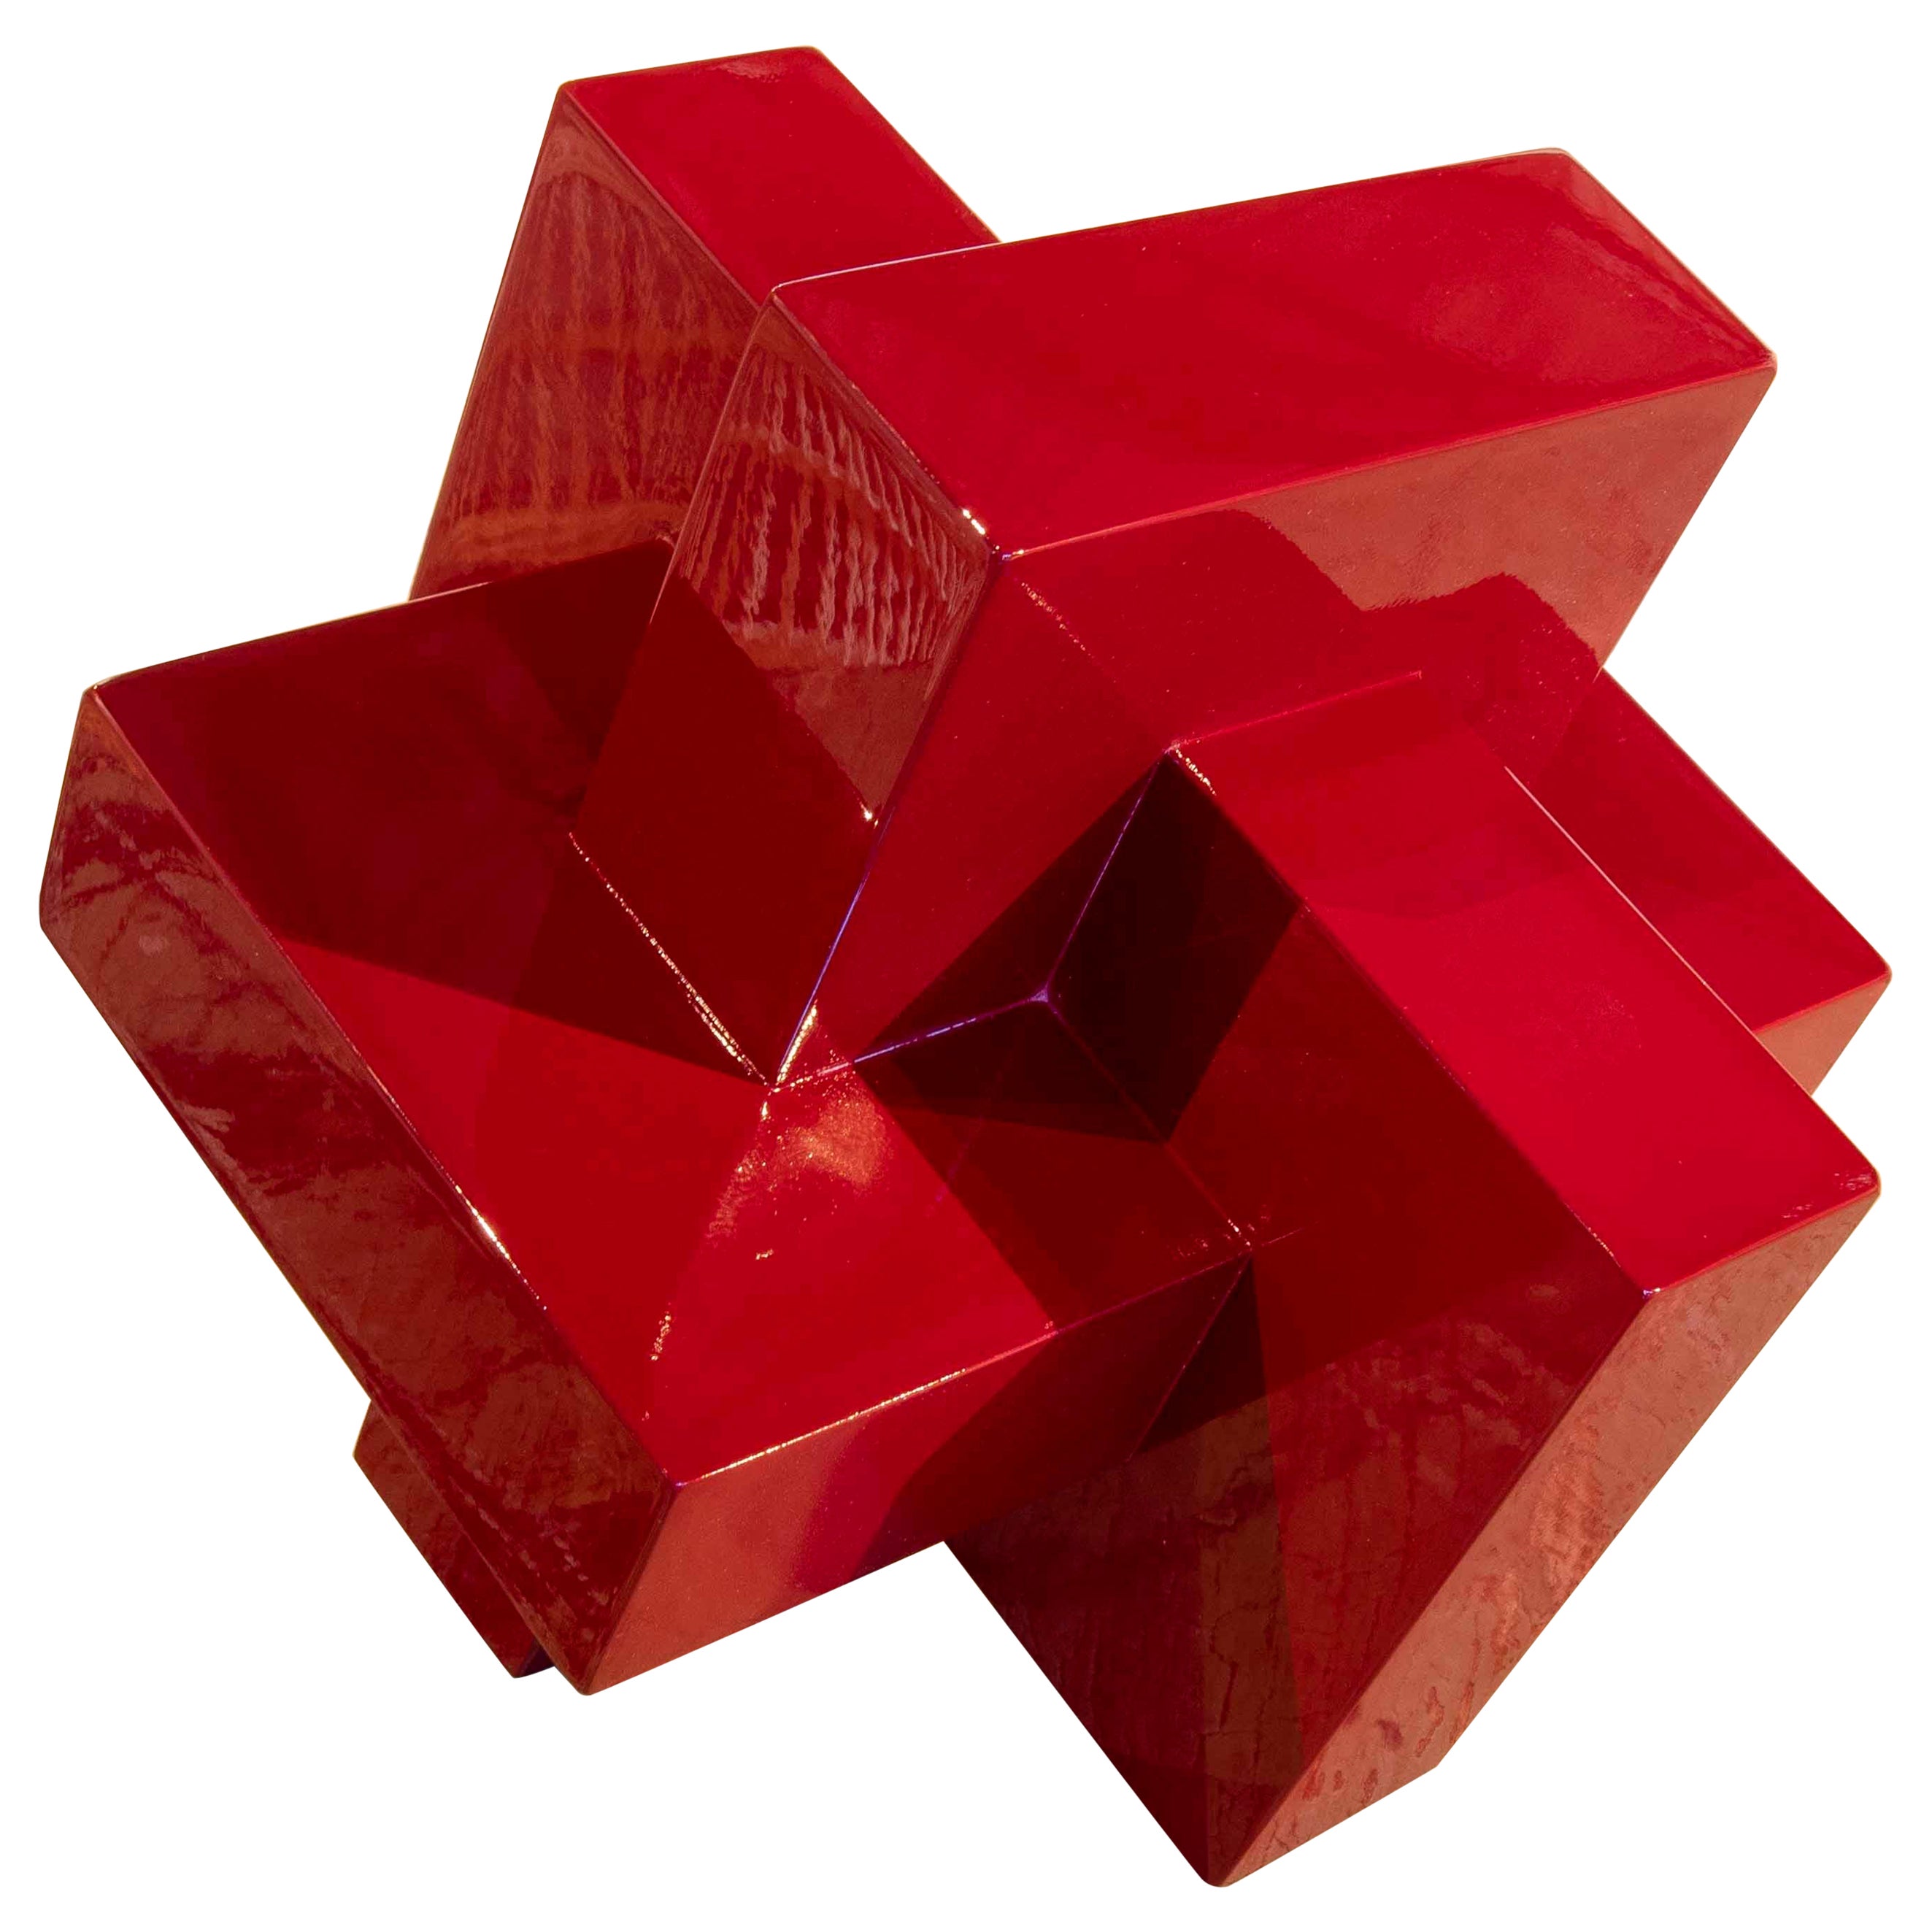 Modern Red Lacquered Wood Sculpture with Intertwined Straight Forms